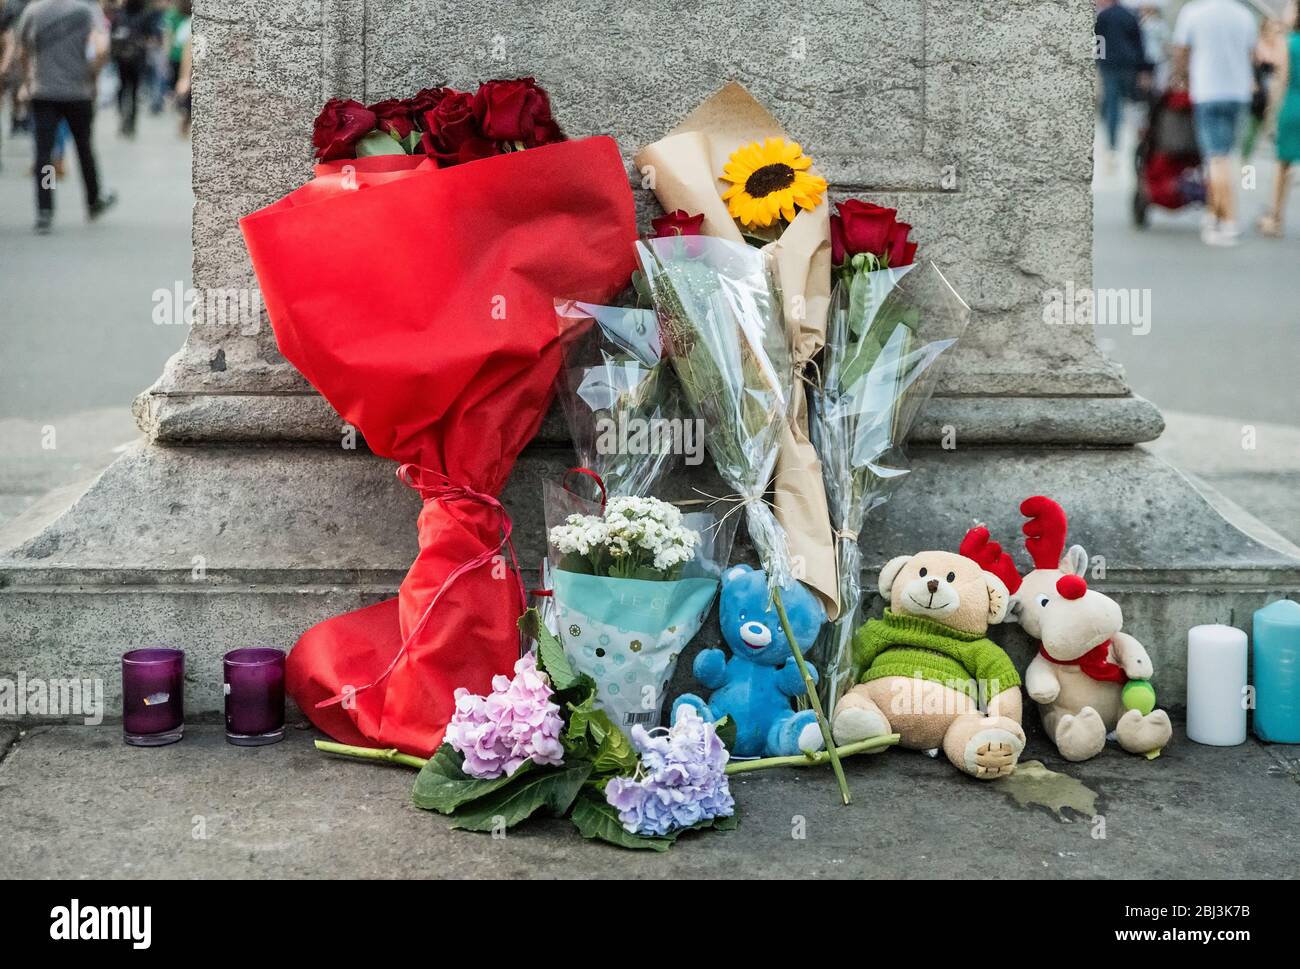 Memorial tribute flowers and candles placed at Las Ramblas district which was site of a 2017 terror attack that killed 13 people in Barcelona. Stock Photo